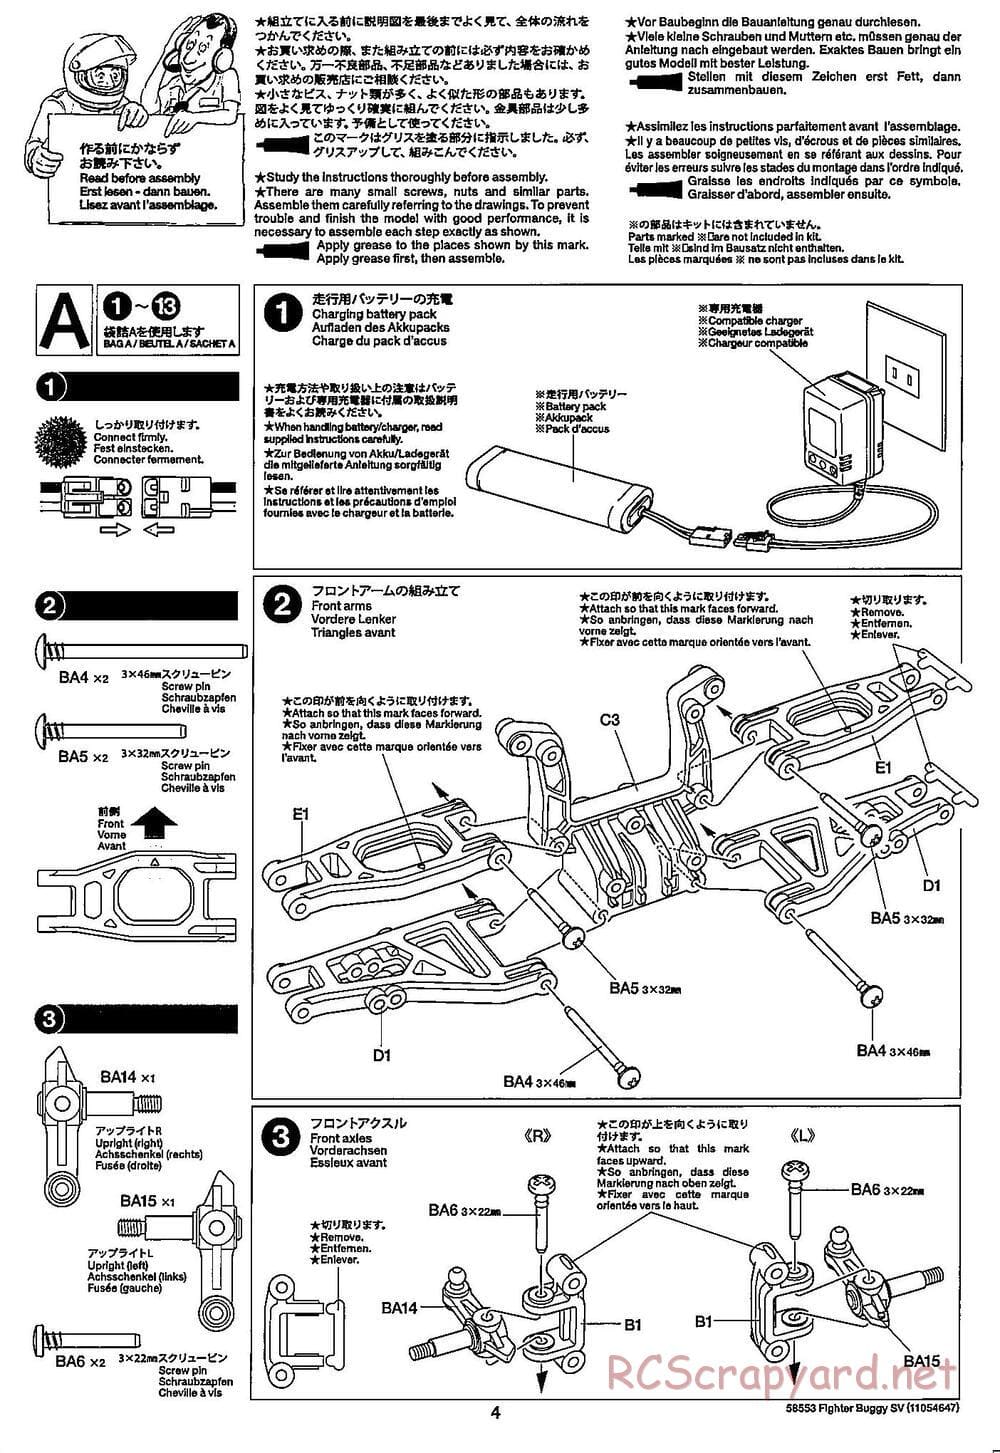 Tamiya - Fighter Buggy SV Chassis - Manual - Page 4